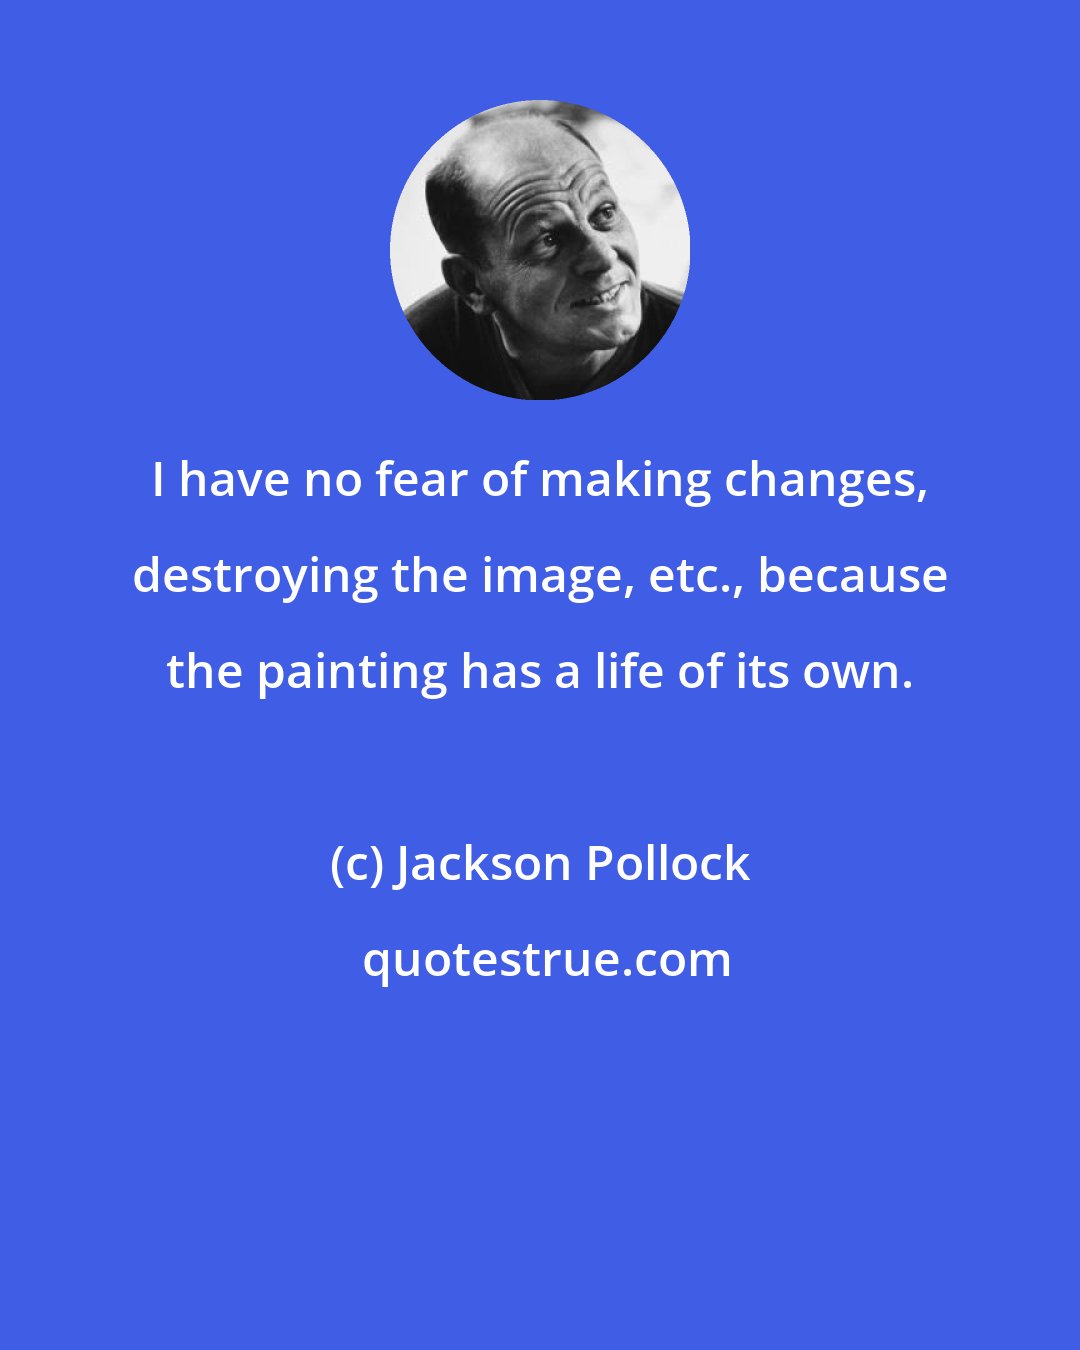 Jackson Pollock: I have no fear of making changes, destroying the image, etc., because the painting has a life of its own.